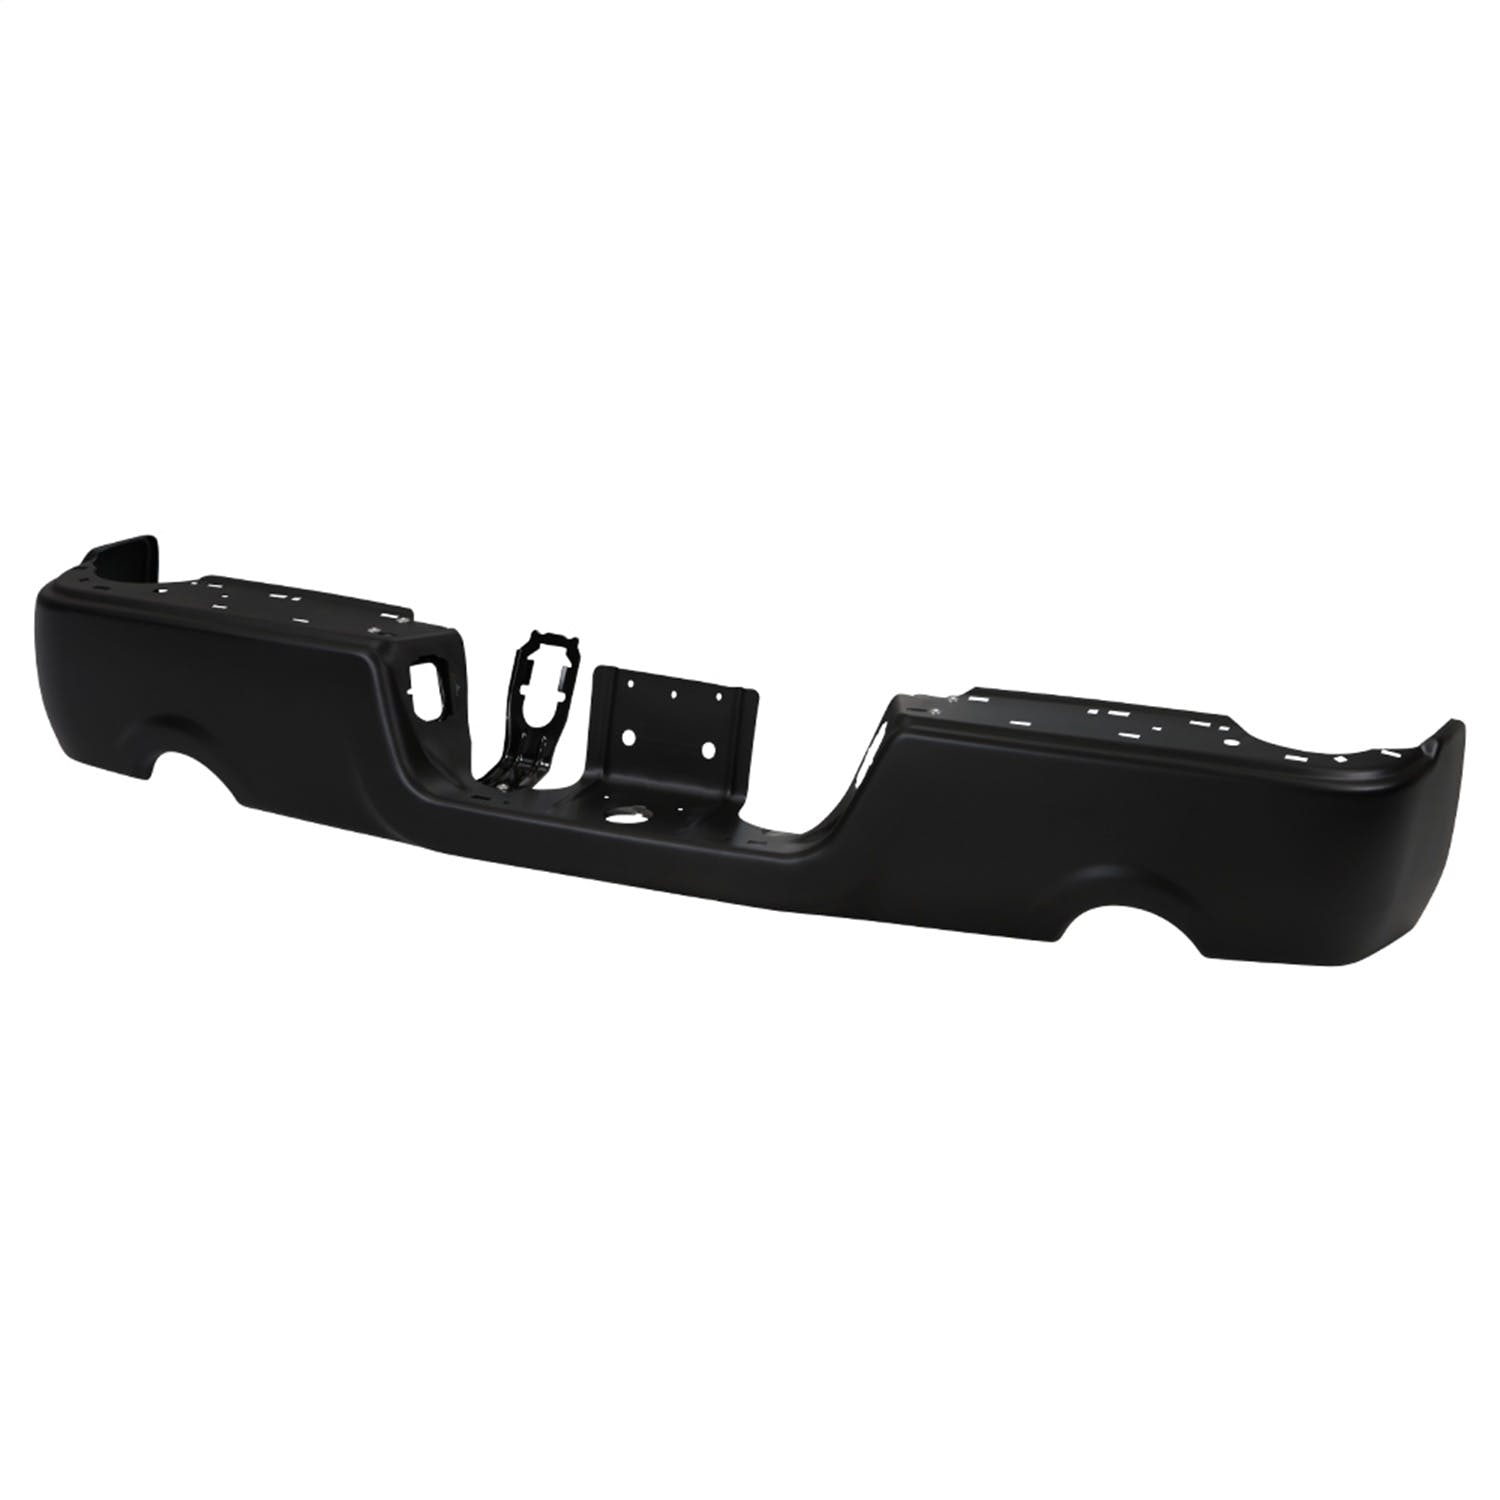 XTUNE POWER 9046933 OEM Style Steel Rear Bumper Black ( Bumper Shell Only NO Hardware Included ) ( OEM Part # CH1102372 )